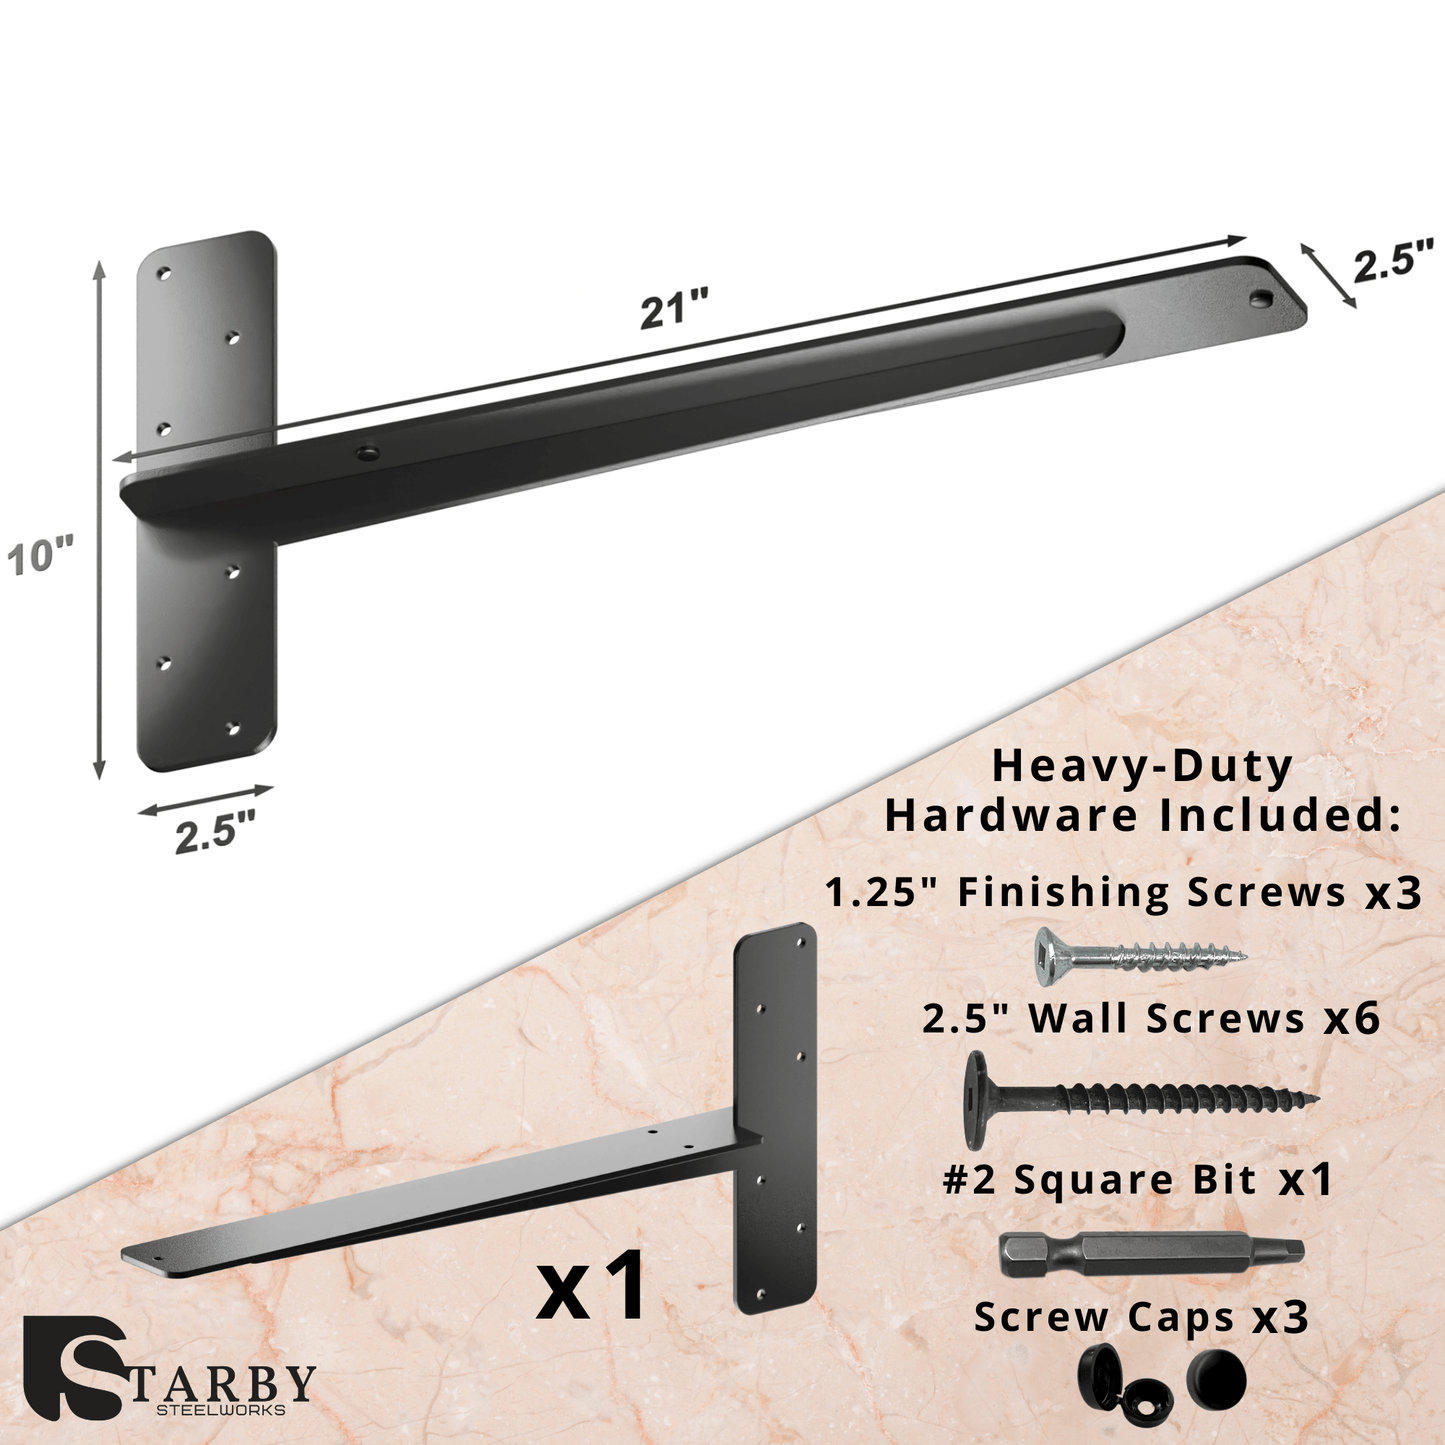 Ultimate Heavy-Duty Floating Granite Bracket - Premium T-Bracket for Cantilever Shelving | Strong, Invisible Support for Free Hanging Countertop Shelf Bench| Made in USA | Sleek Seamless DIY Design | Lifetime Warranty (1-PACK)